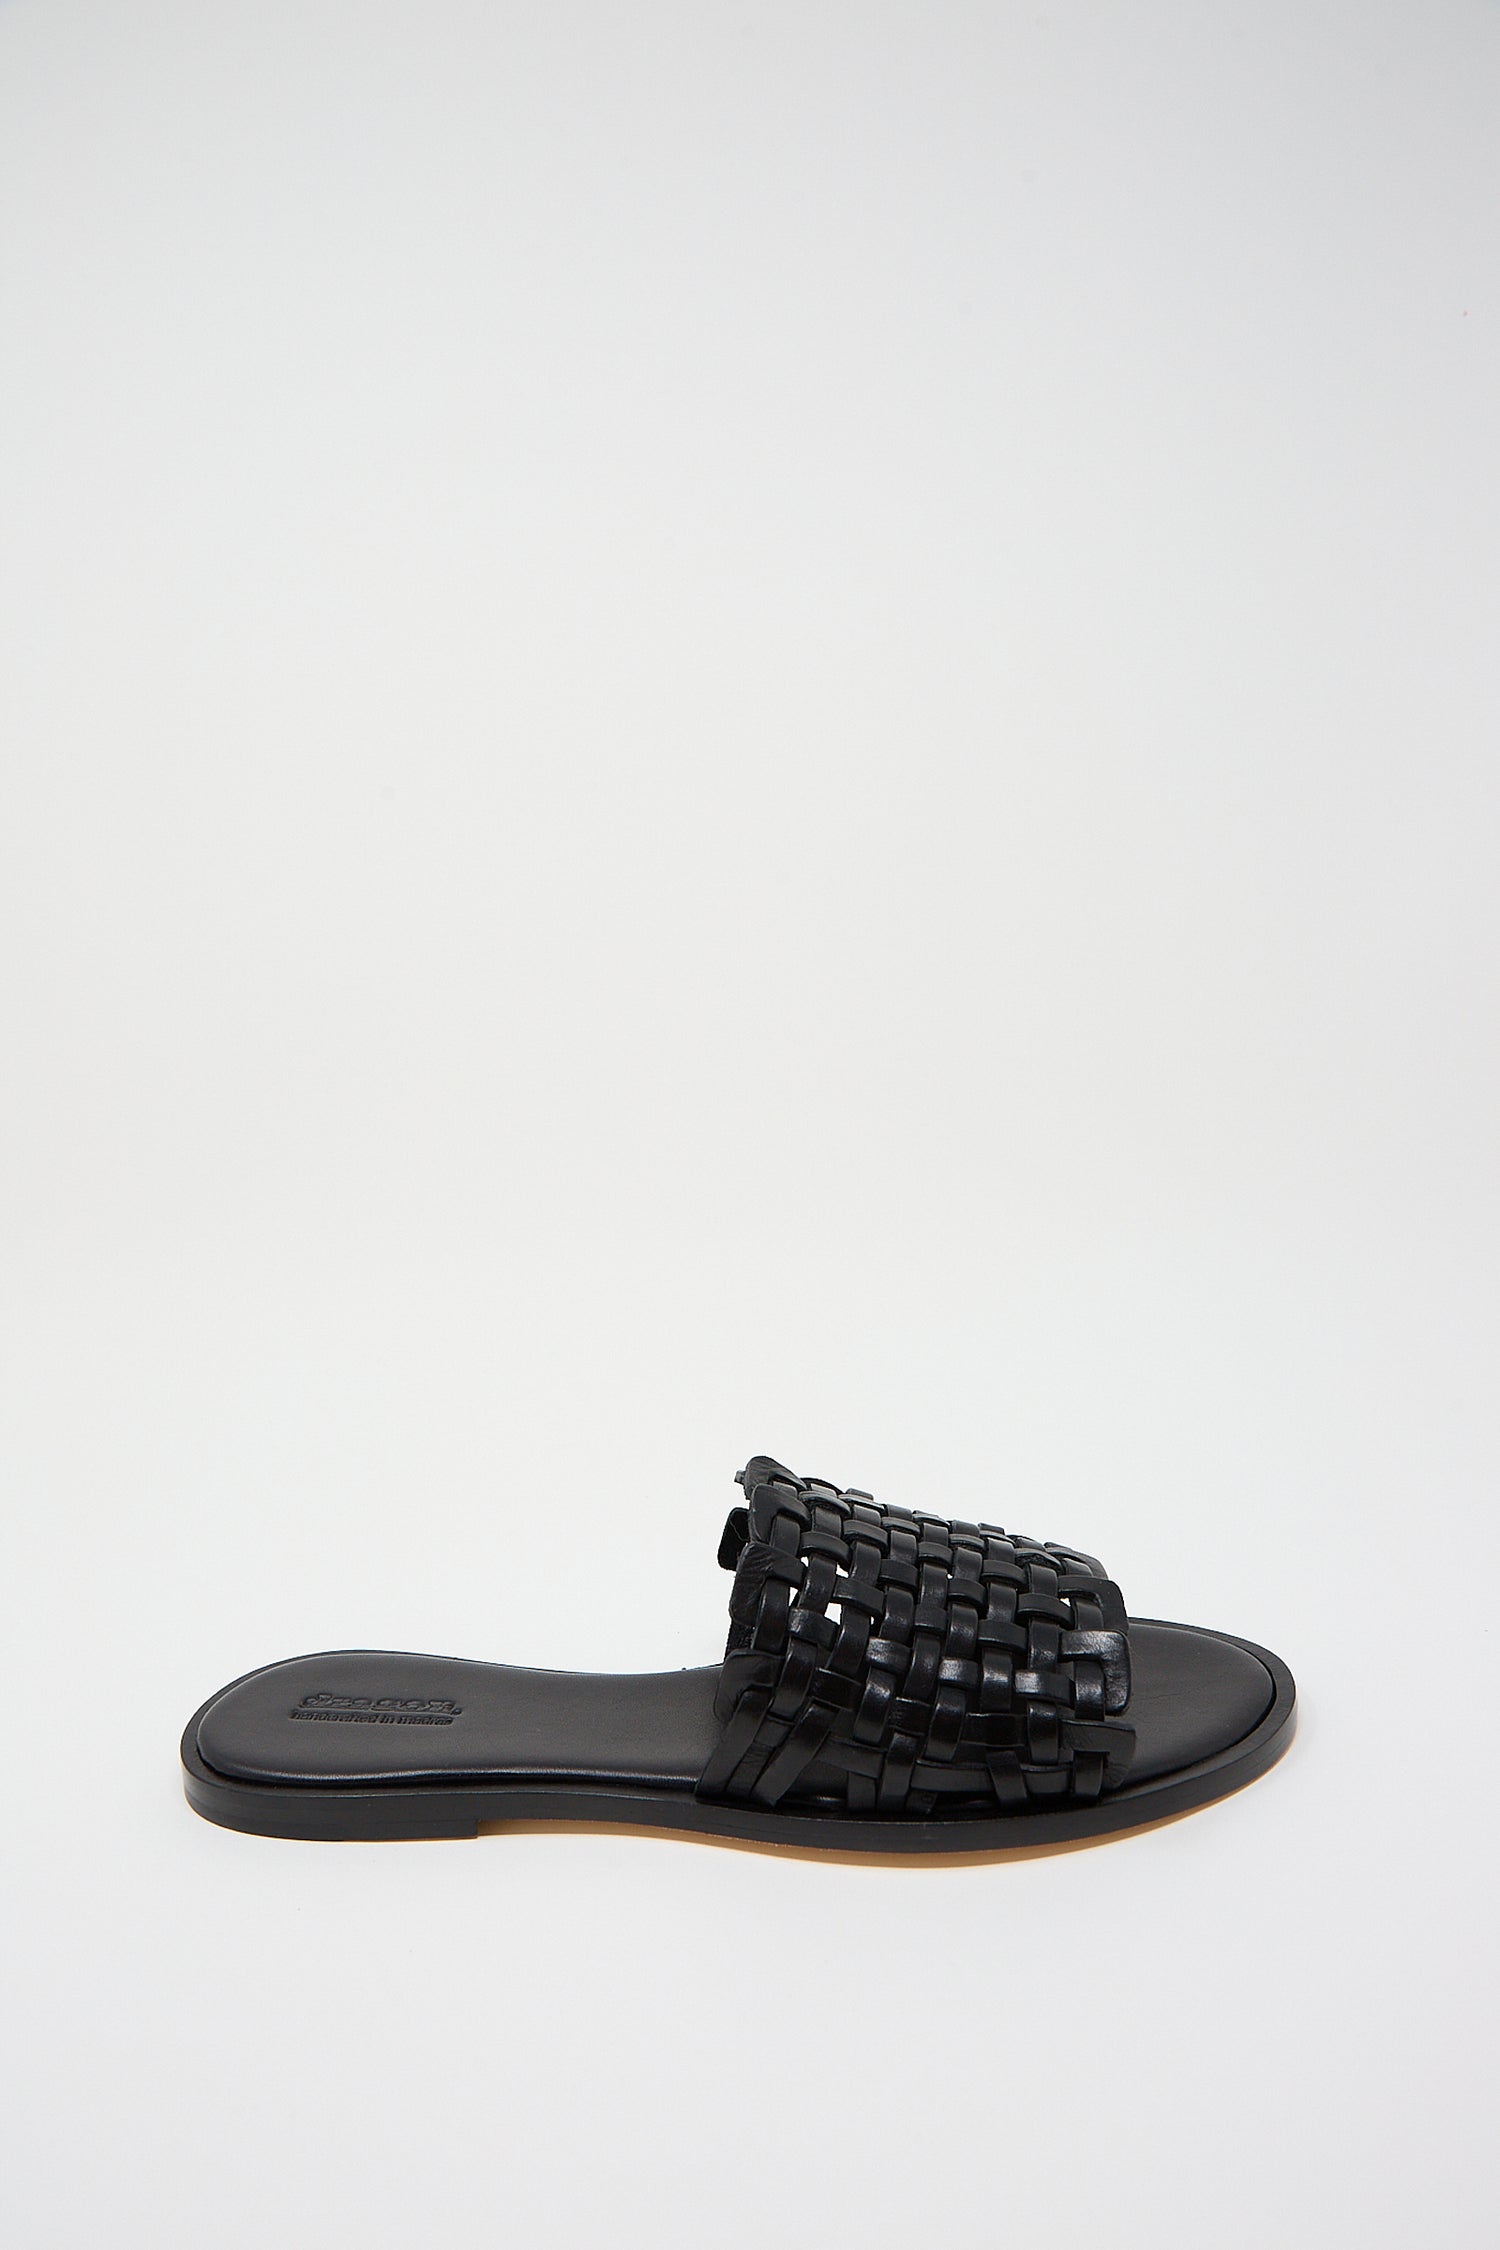 Zig Zag Sandal in Black by Dragon Diffusion, handwoven leather slide sandal on a white background.